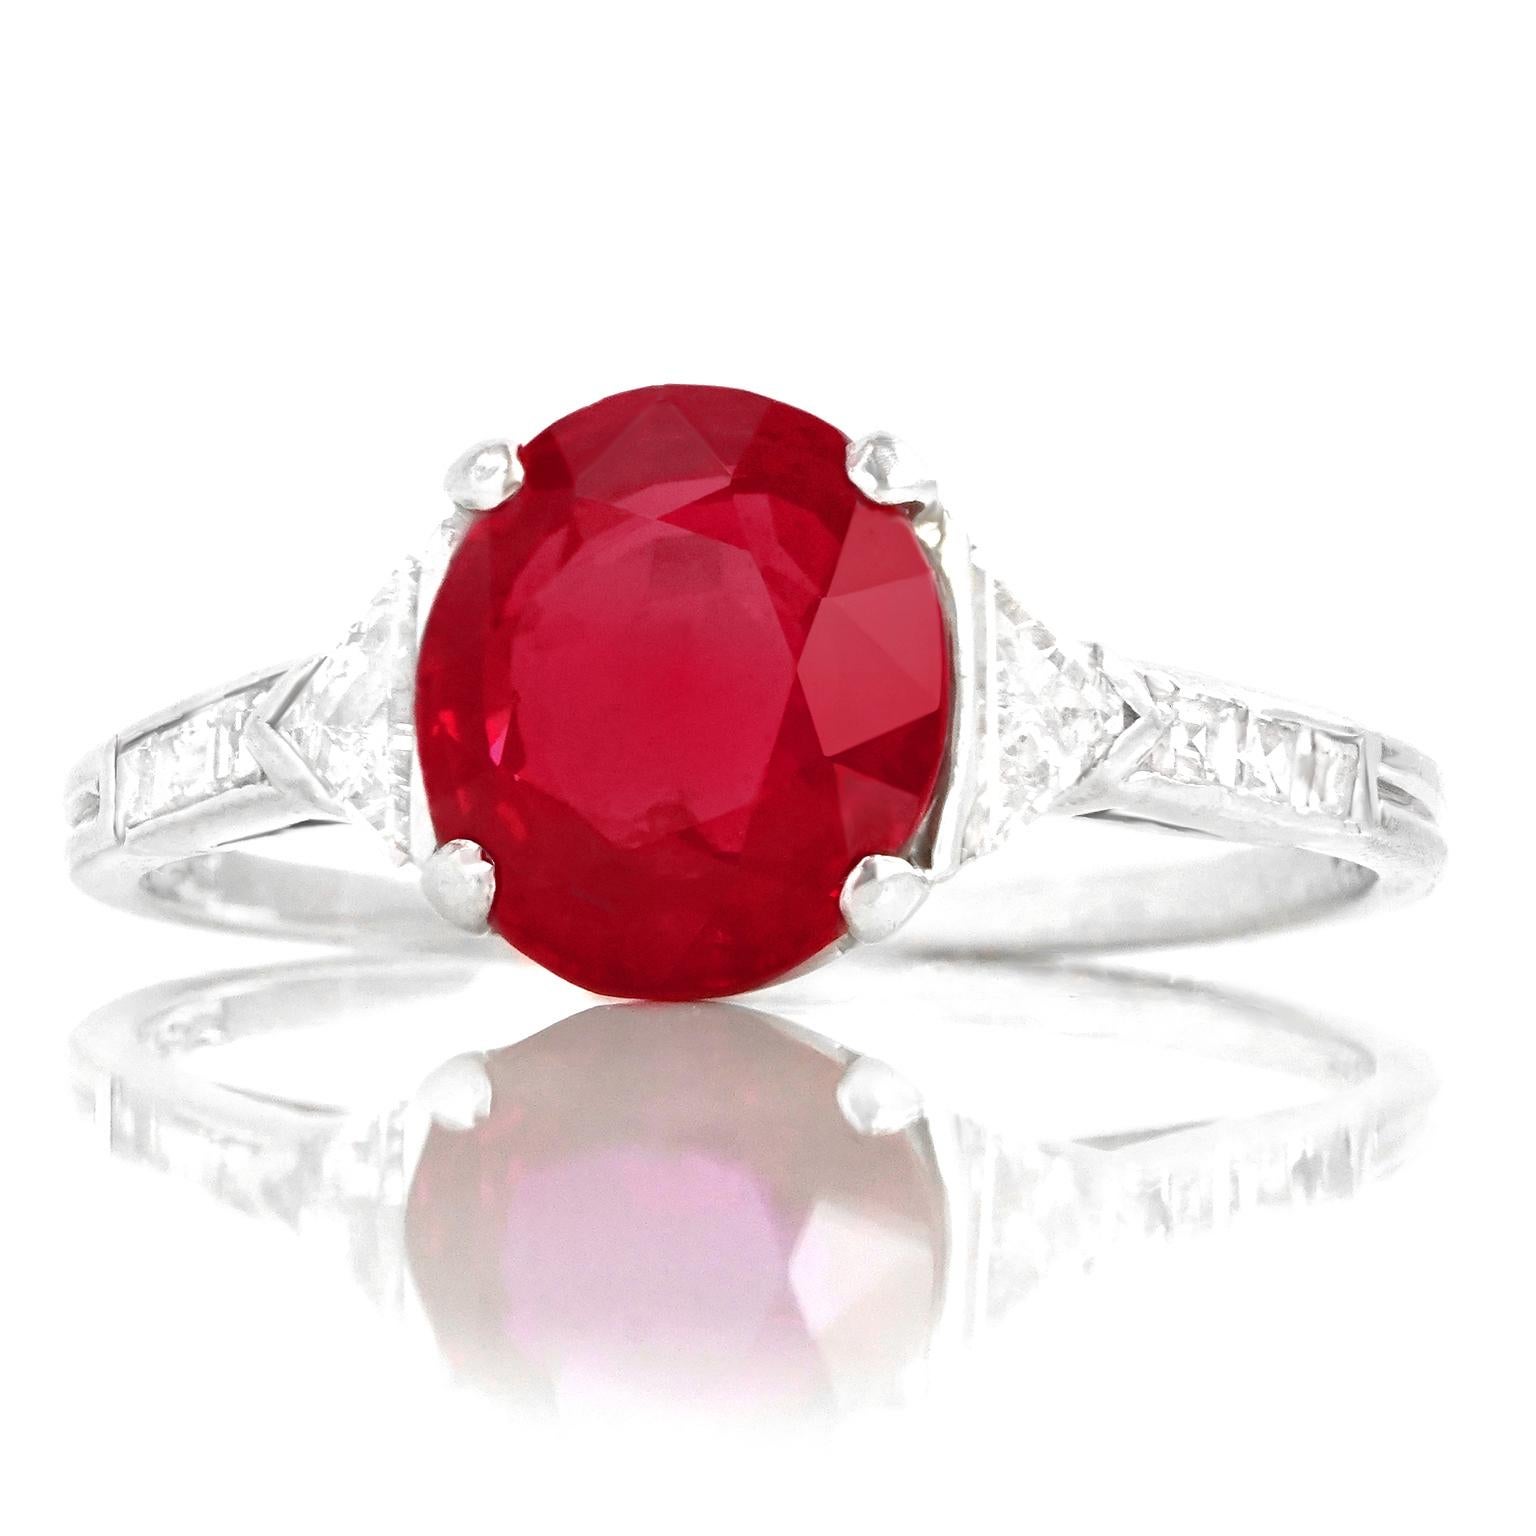 Circa 1920-30s, Platinum, by Tiffany & Co, New York.  This magnificent Art Deco ring by Tiffany & Co. is set with an incredible 2.63 carat no-heat Mogok region Burma Ruby (AGL Report). Set in platinum and flanked by .75 carats of brilliant white